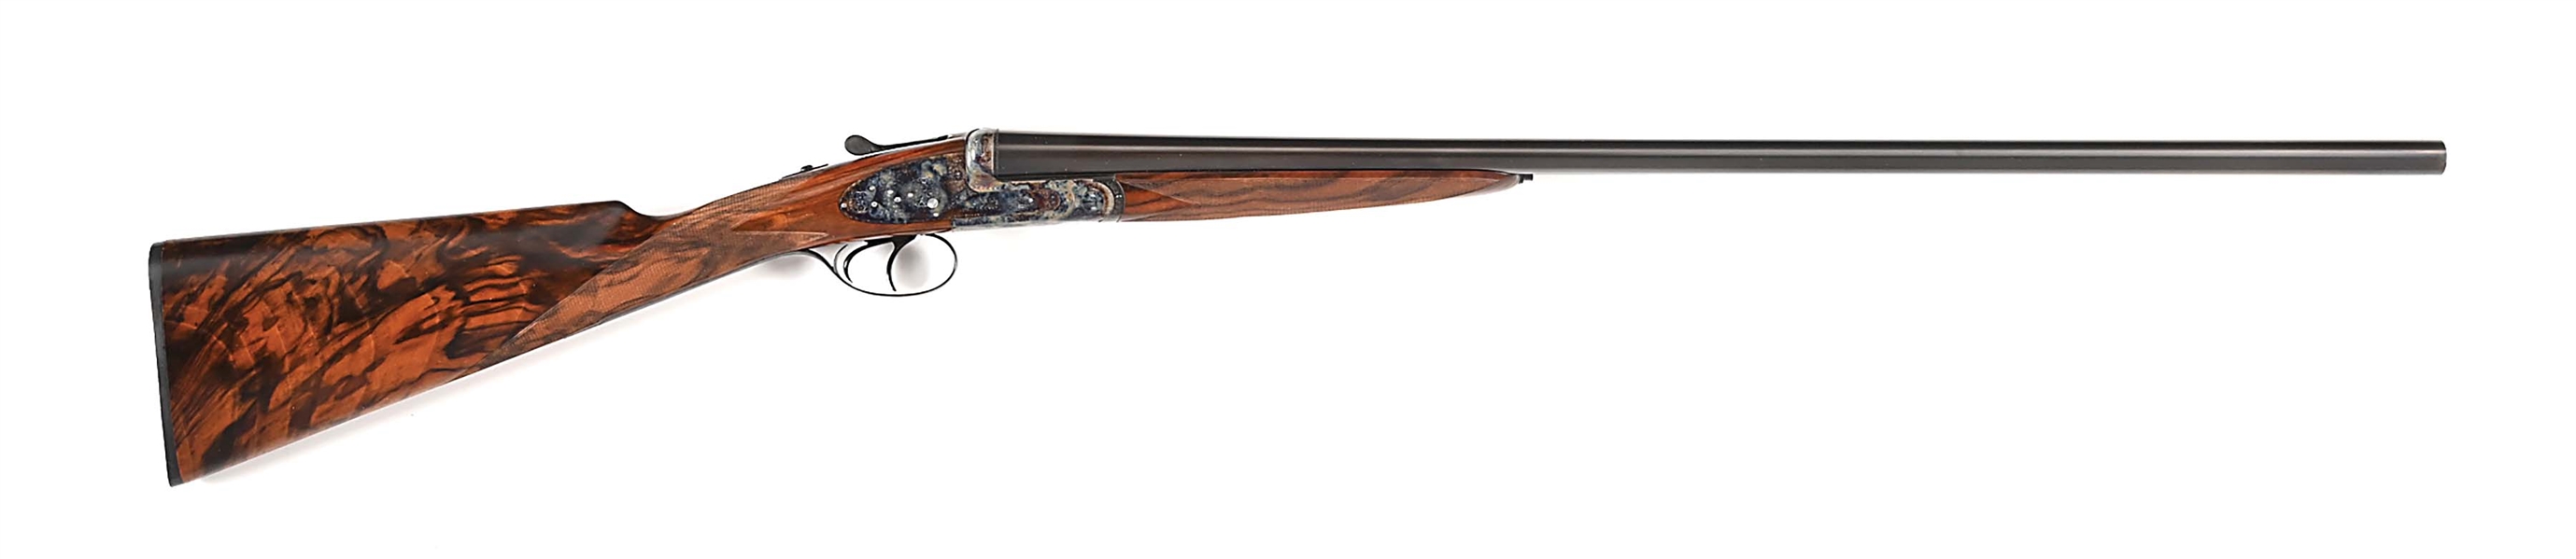 (M) PIOTTI KING ENGLISH 16 BORE SIDE BY SIDE SHOTGUN WITH CASE.